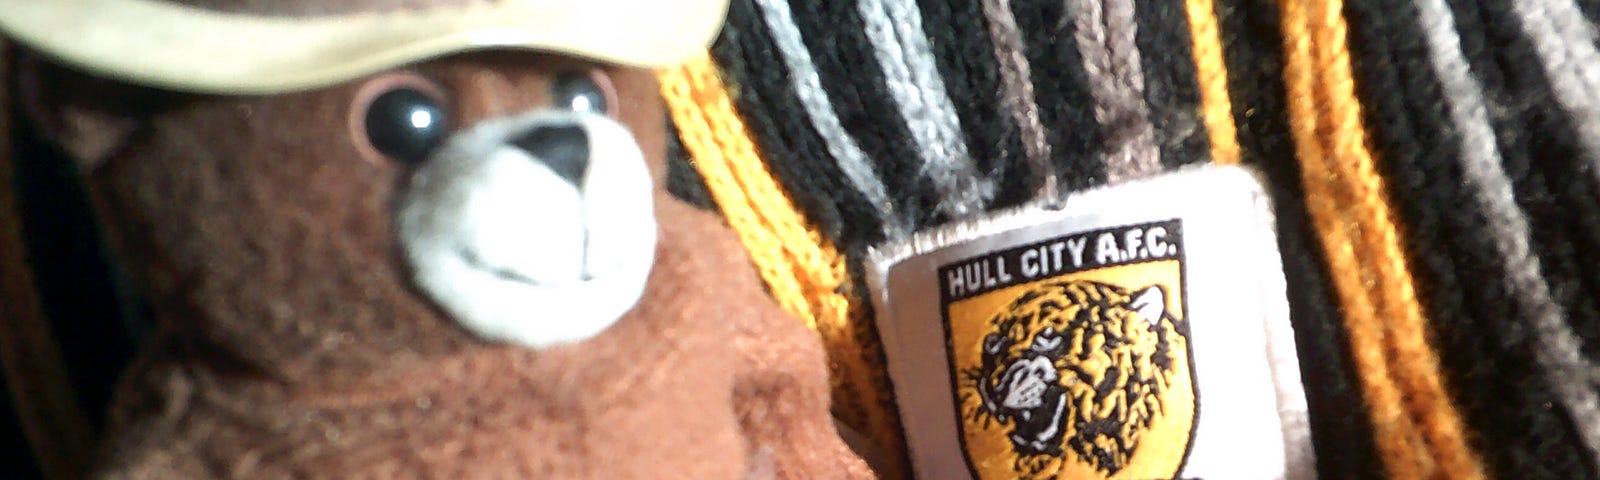 Image of soft toy Smokey Bear sat on Hull City football club scarf depicting a Tigers on a shield in black and amber colours with a a logo ‘The Tigers’.